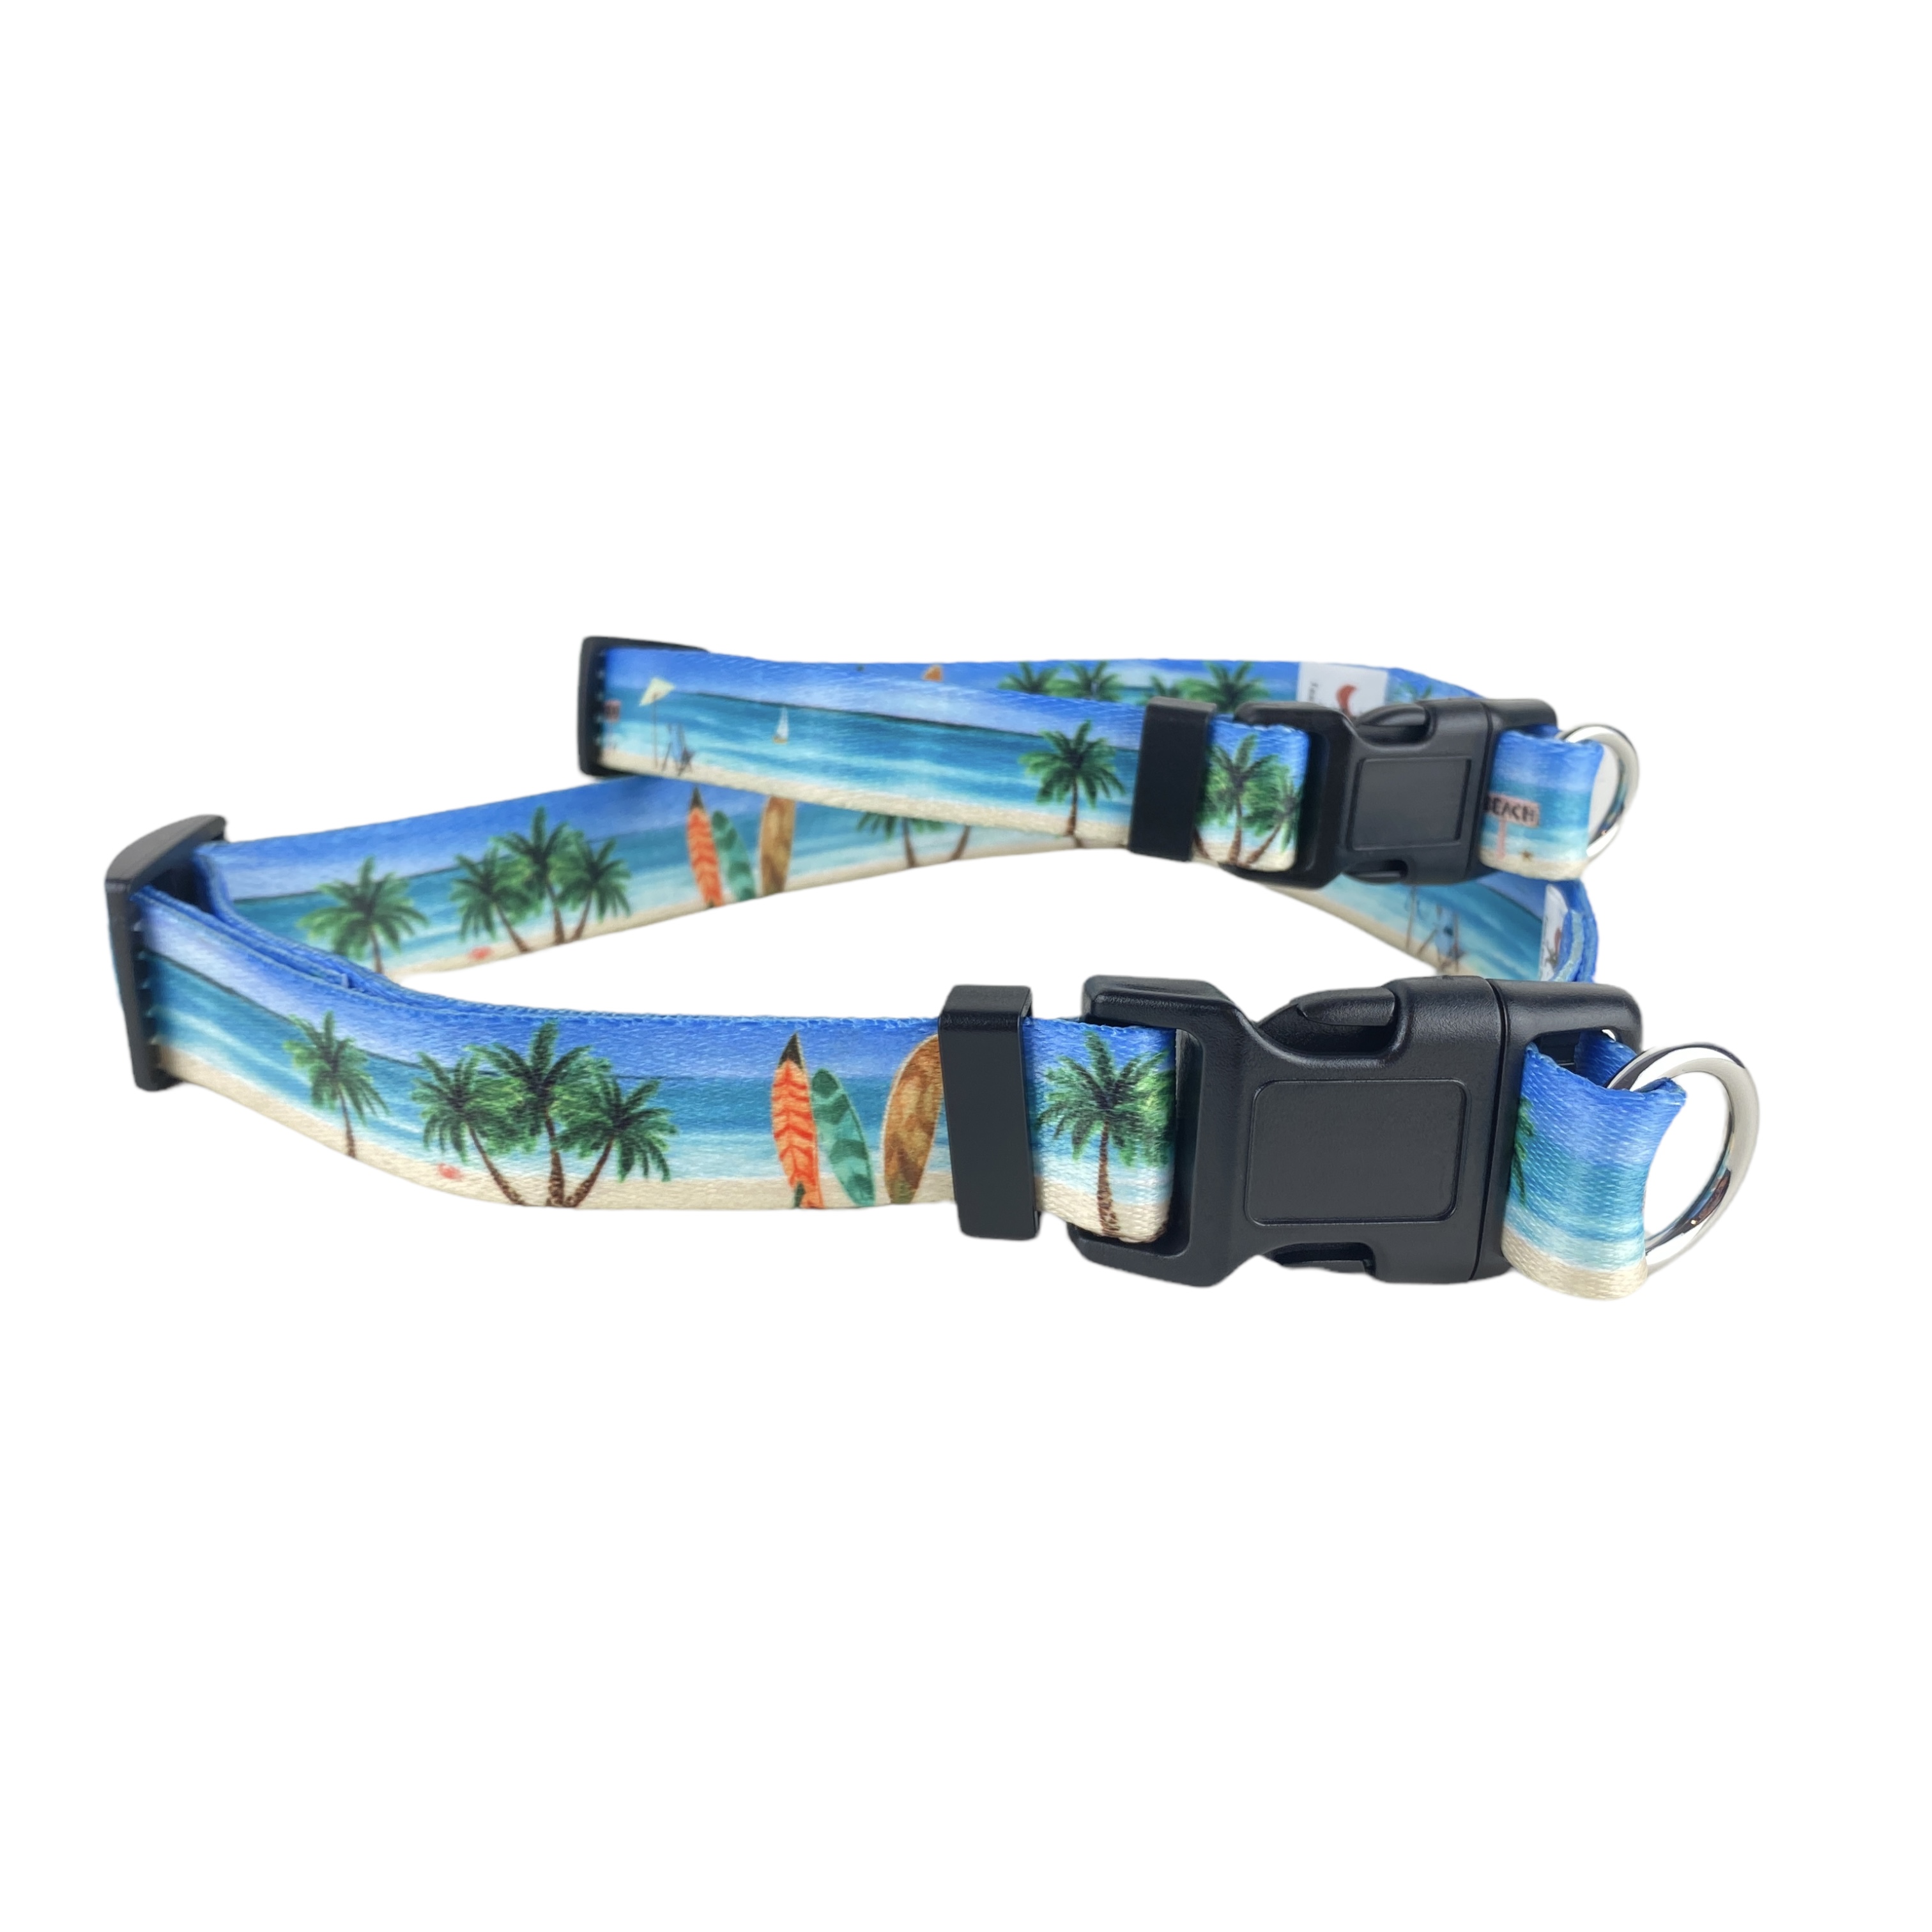 image of a Safe cinch no escape dog collar by fearless pet in a beach theme print with palm trees